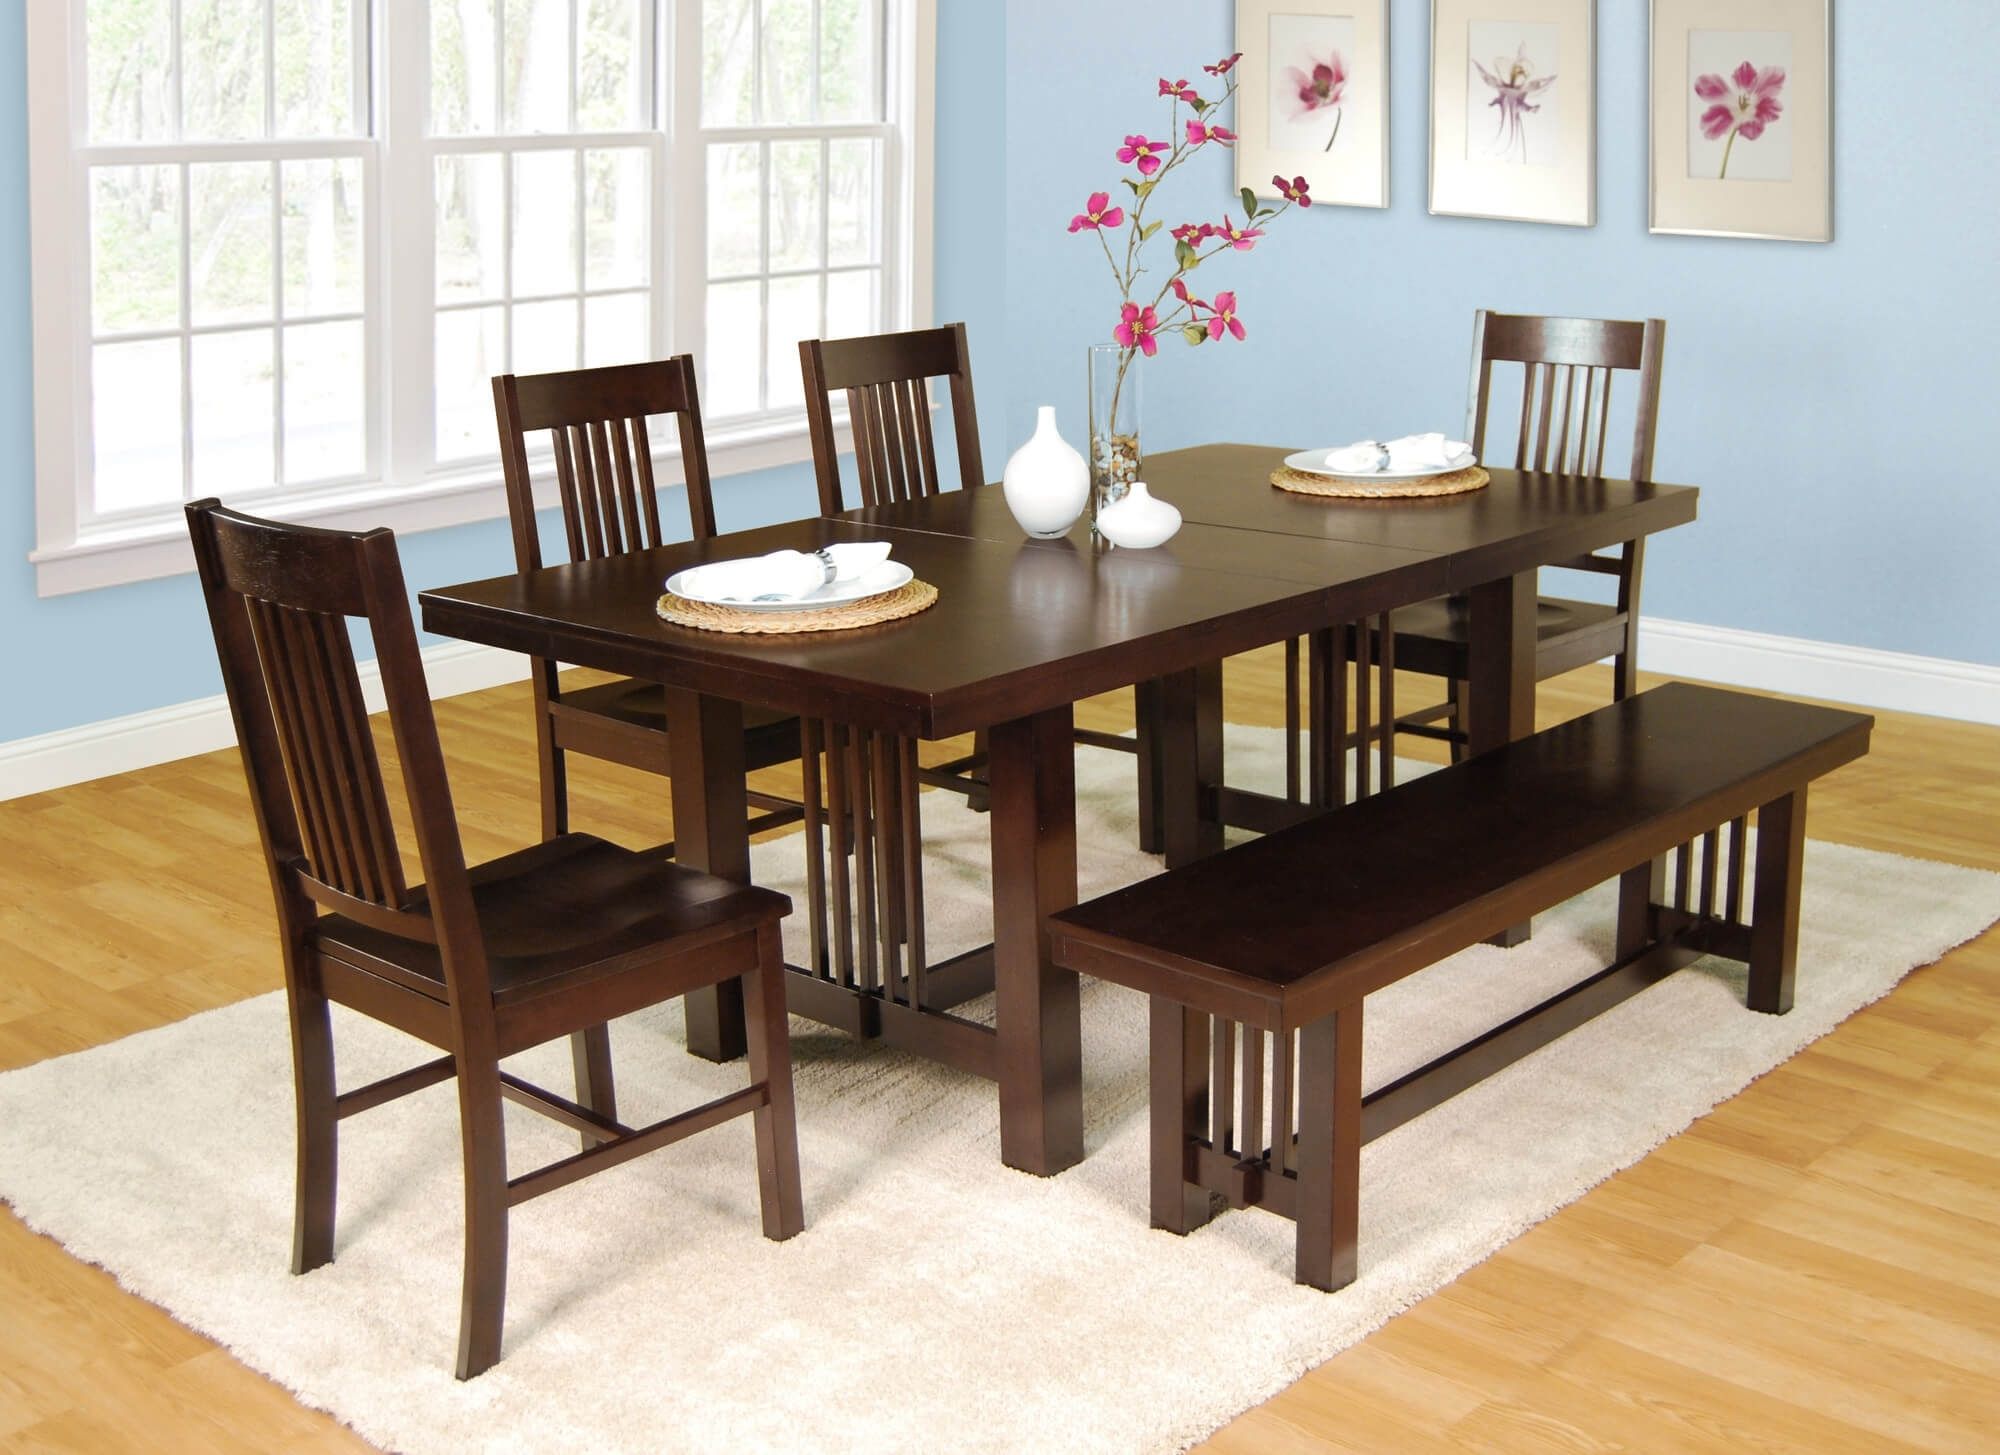 Dining Room Sets At Sears — Bluehawkboosters Home Design Intended For Most Up To Date Craftsman 9 Piece Extension Dining Sets (View 12 of 20)